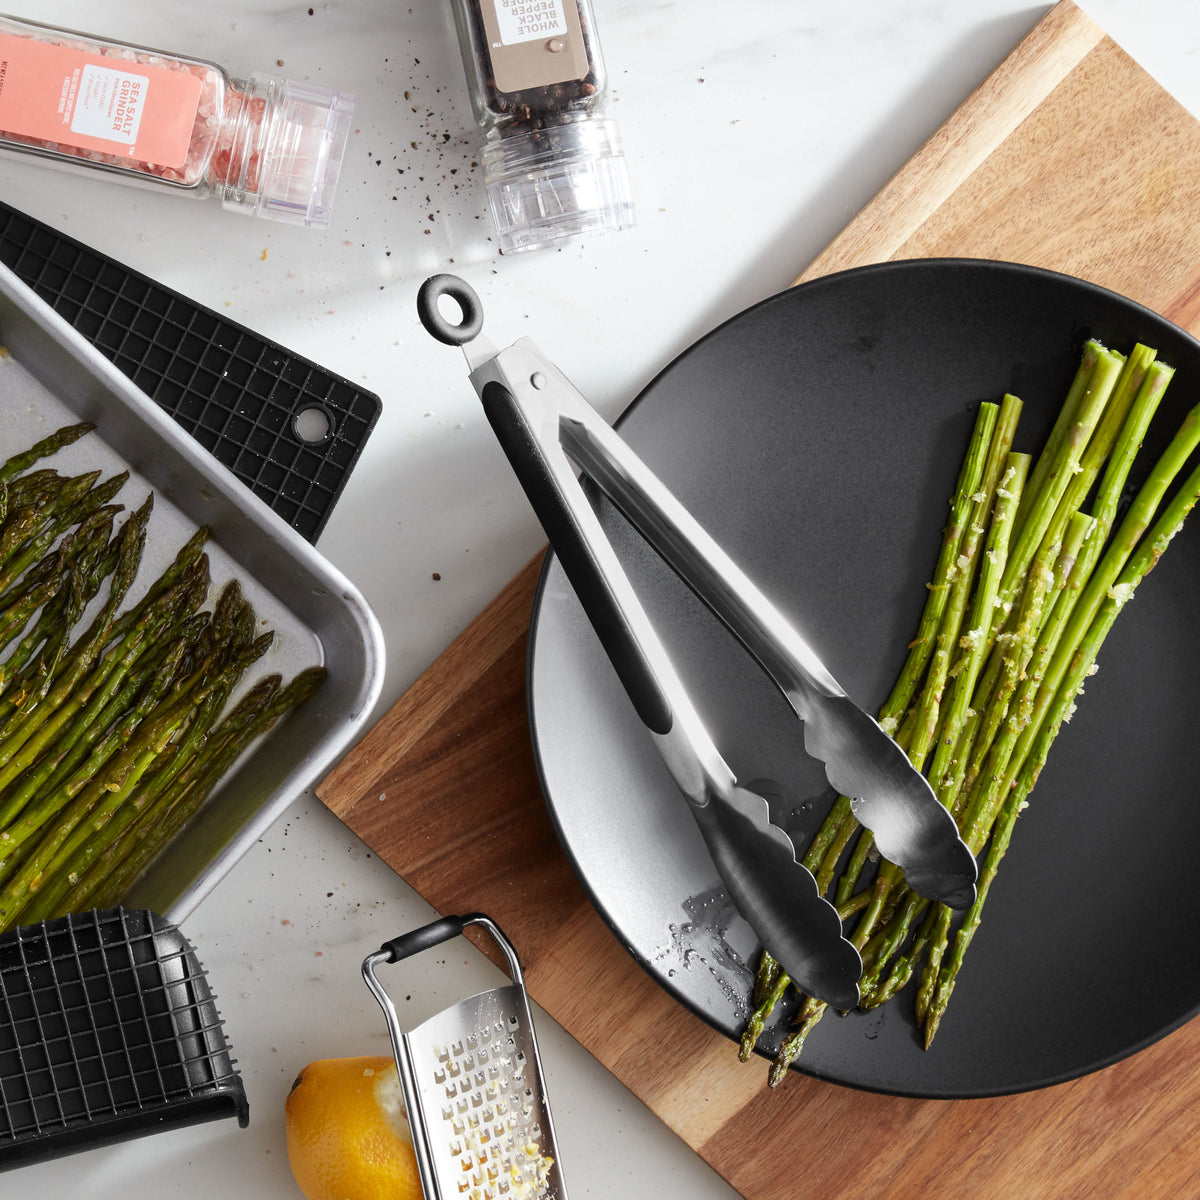 Lifestyle photo, 9 inch stainless steel tongs locked in a semi-closed position, leaning on the edge of a plate having just transferred some roasted asparagus spears from a baking tray to a dinner plate.